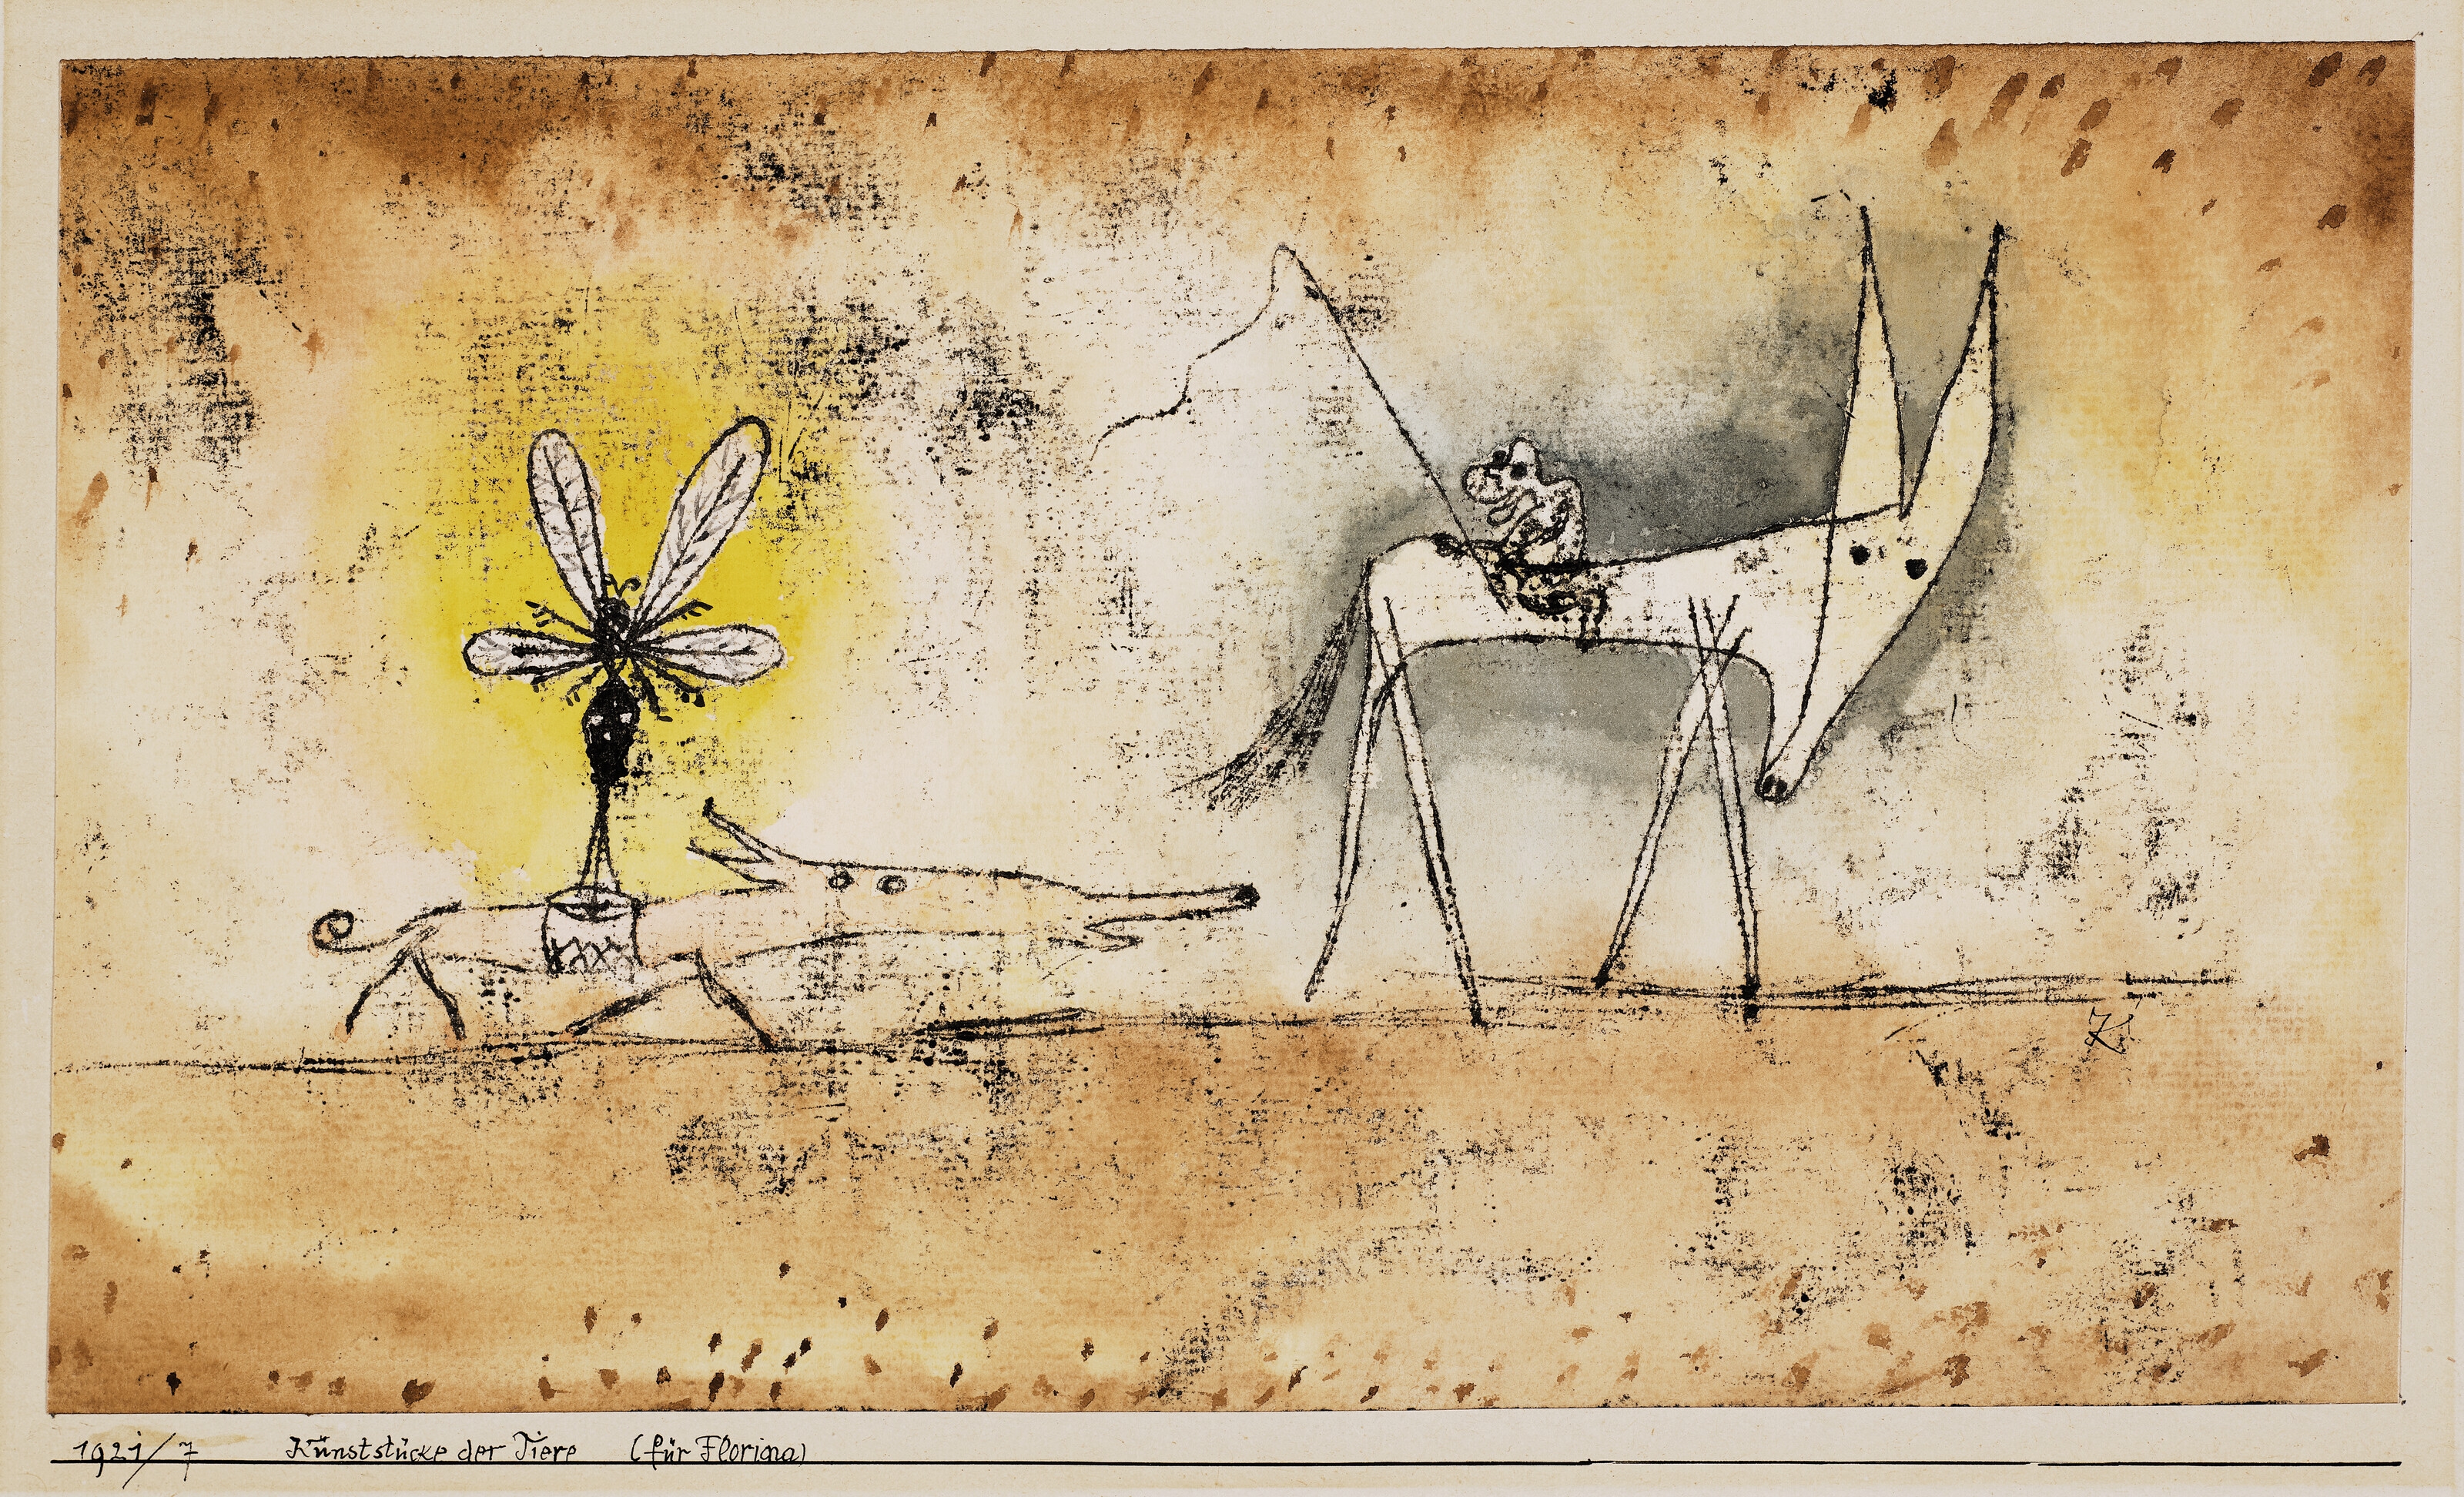 Artwork by Paul Klee, Kunststücke der Tiere (Für Florina), Made of oil transfer and watercolor on paper mounted by the artist on card